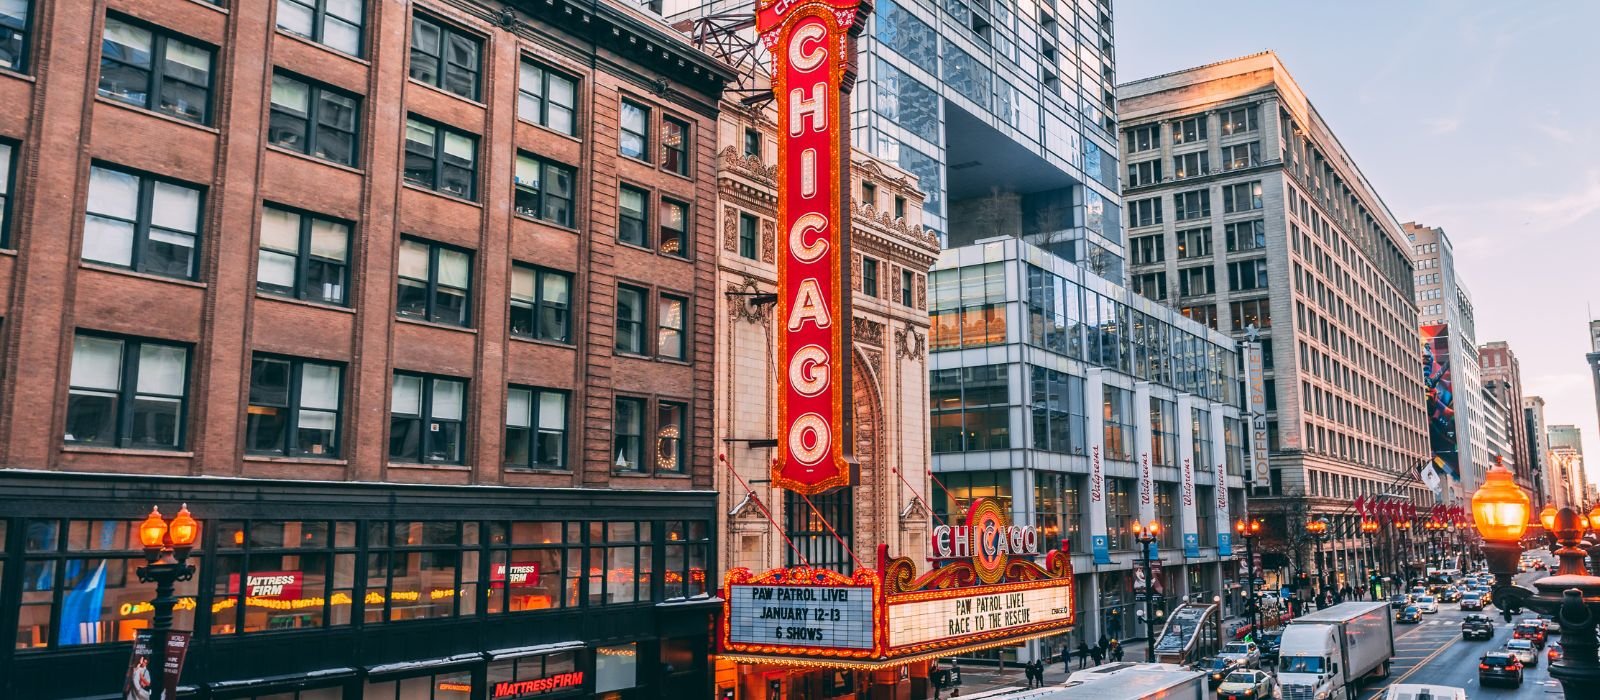 Top 10 Hotels In Chicago